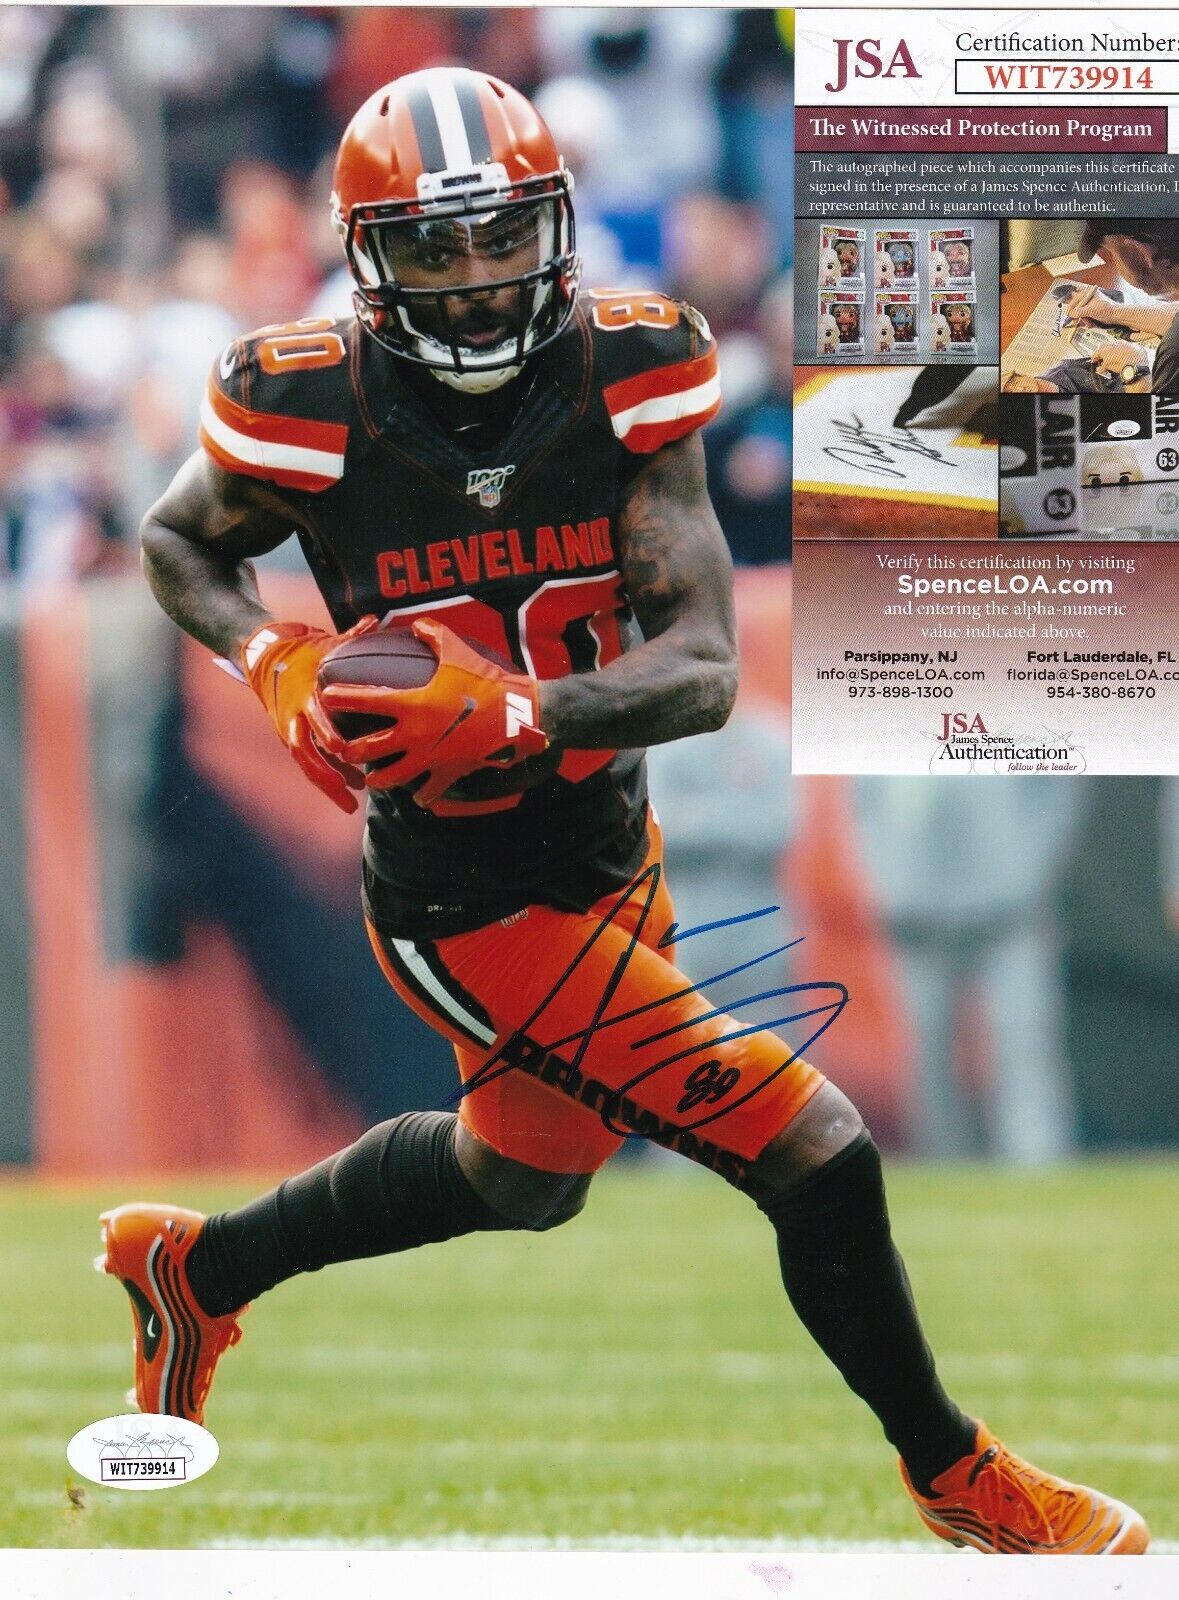 JARVIS LANDRY CLEVELAND BROWNS JSA AUTHENTICATED ACTION SIGNED 8X10